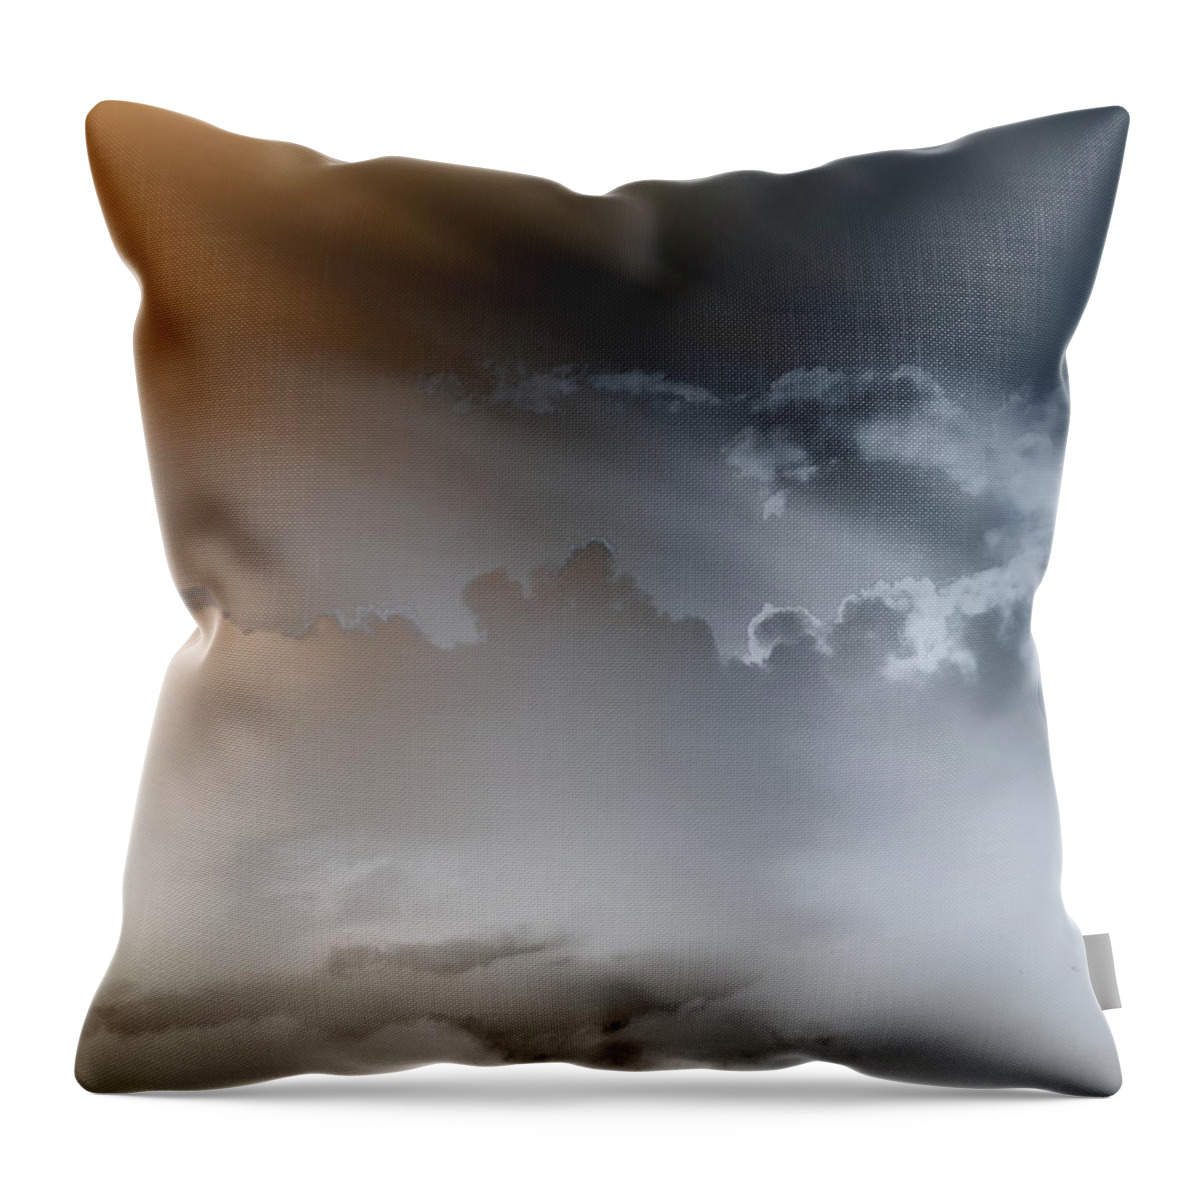 The Sky Fades Throw Pillow featuring the photograph May 24 2 by John Emmett